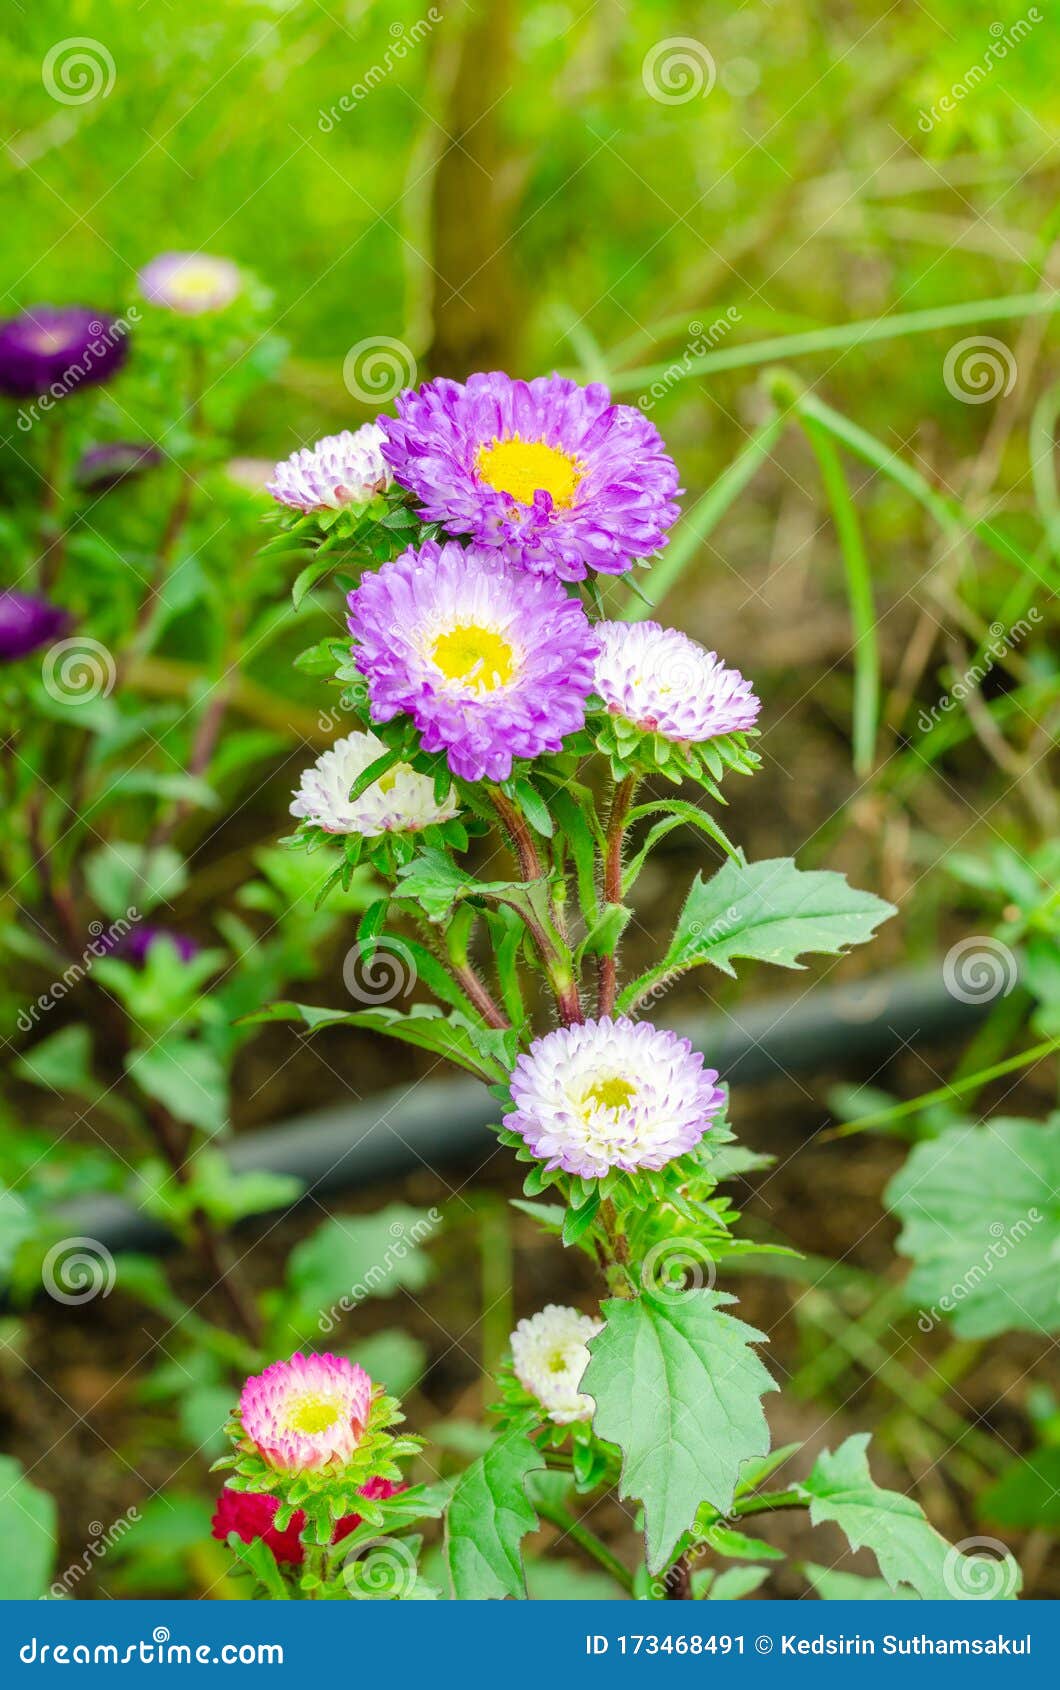 Close Up Of Purple Chinese Aster With Green Leaves Stock Image Image Of Florescence Astern 173468491